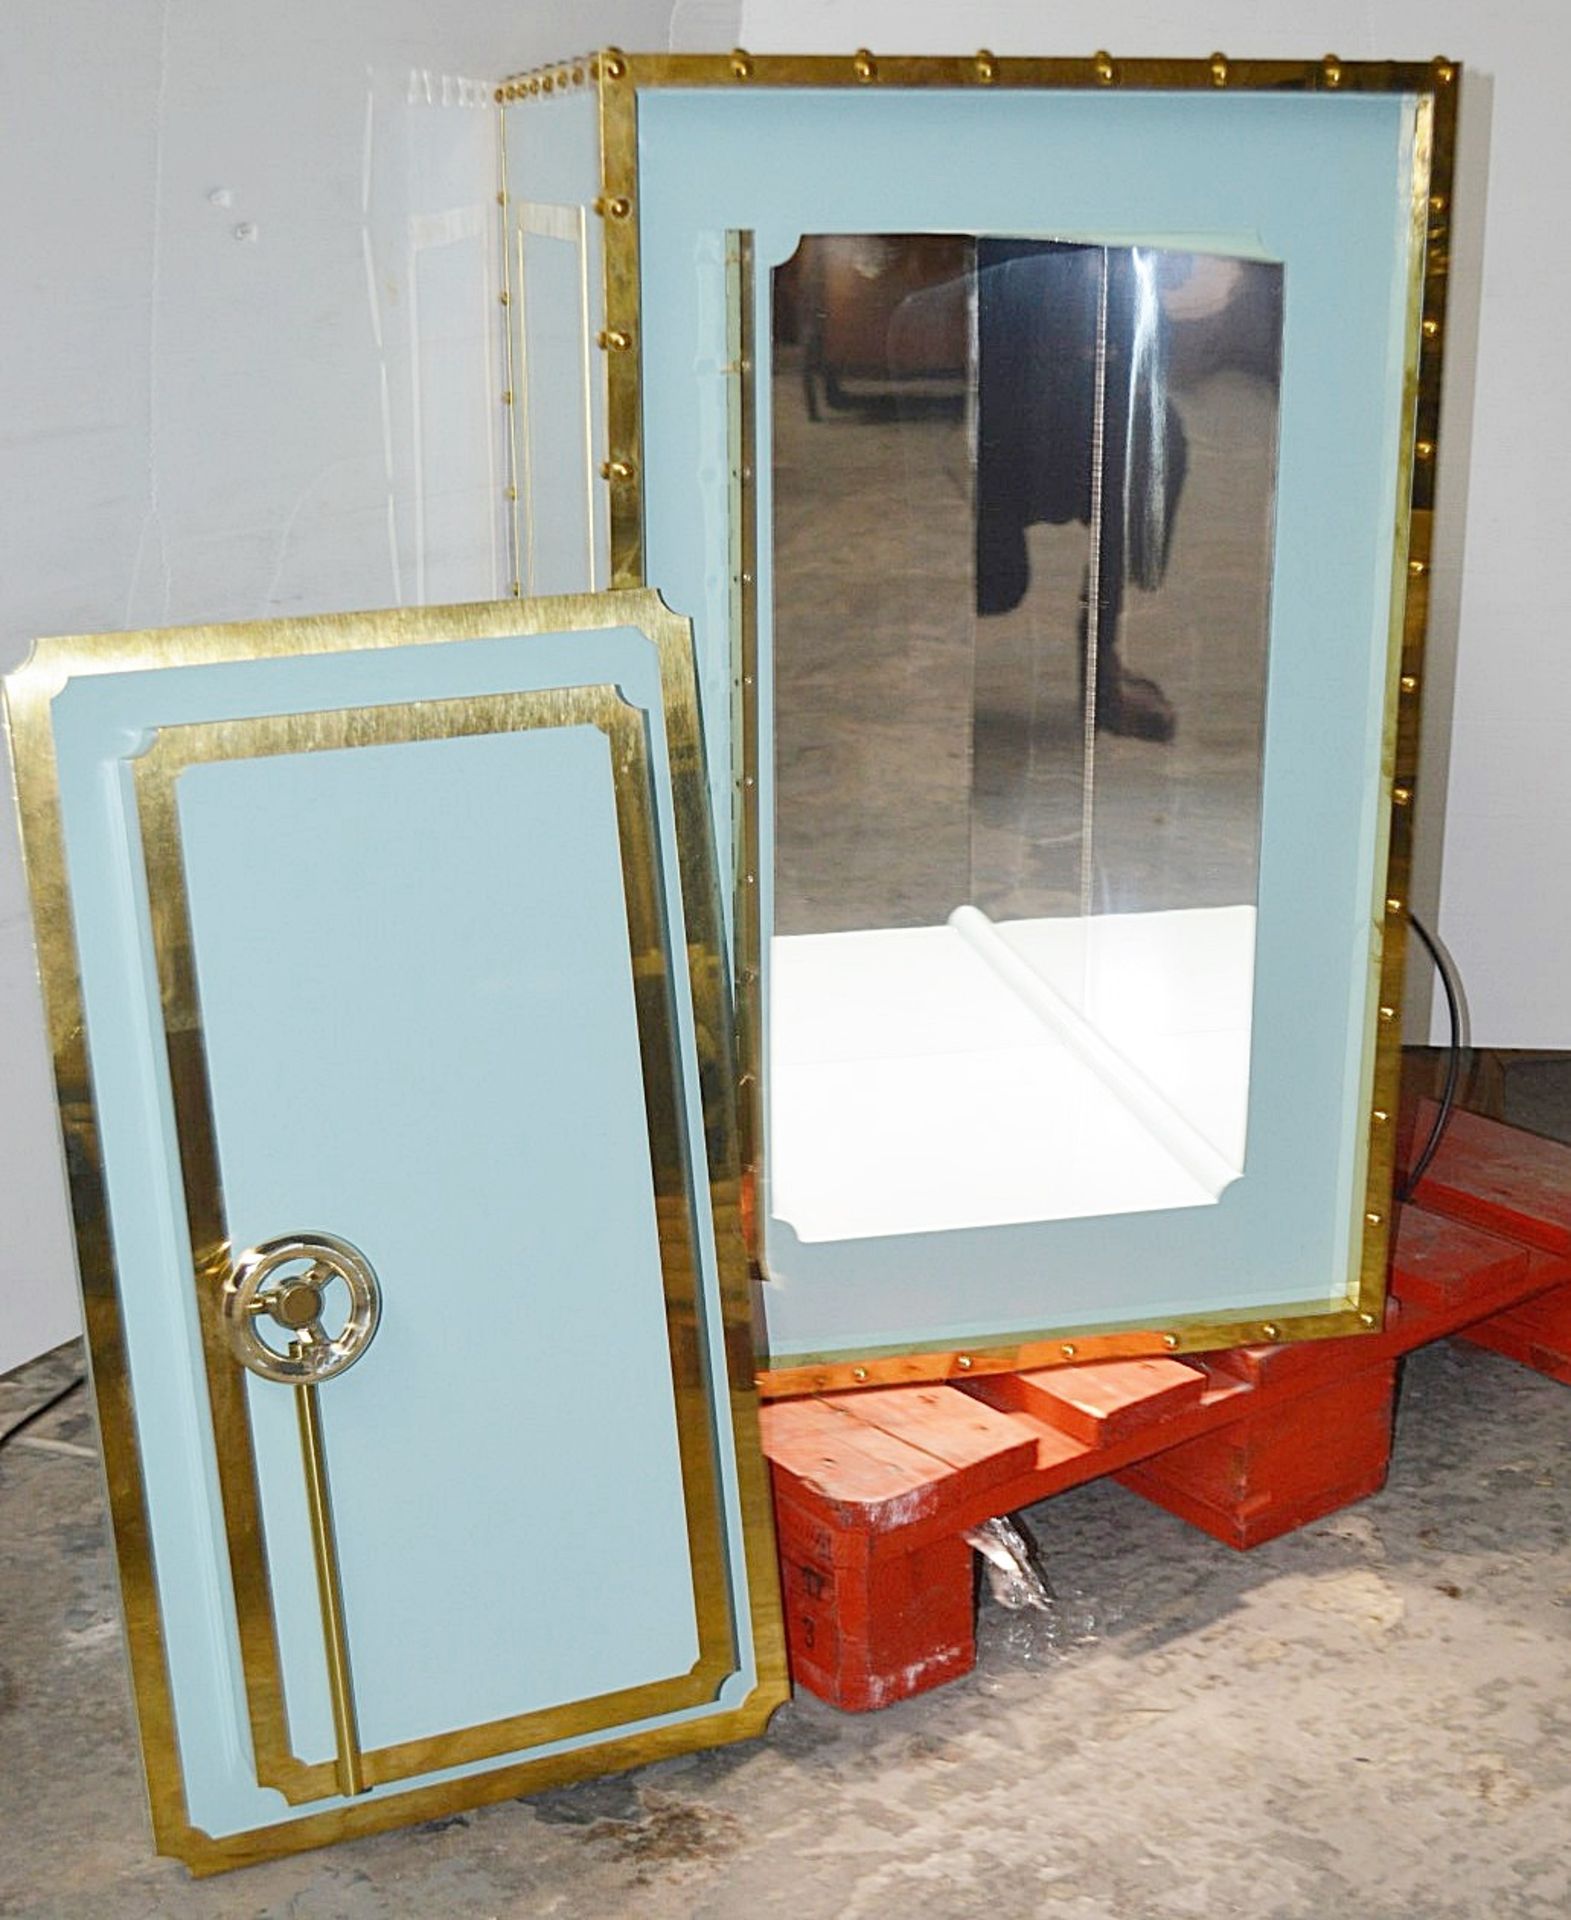 1 x Illuminated Bank Vault Safe-style Mirrored Retail Shop Display Box In Tiffany Blue - Dimensions: - Image 4 of 5